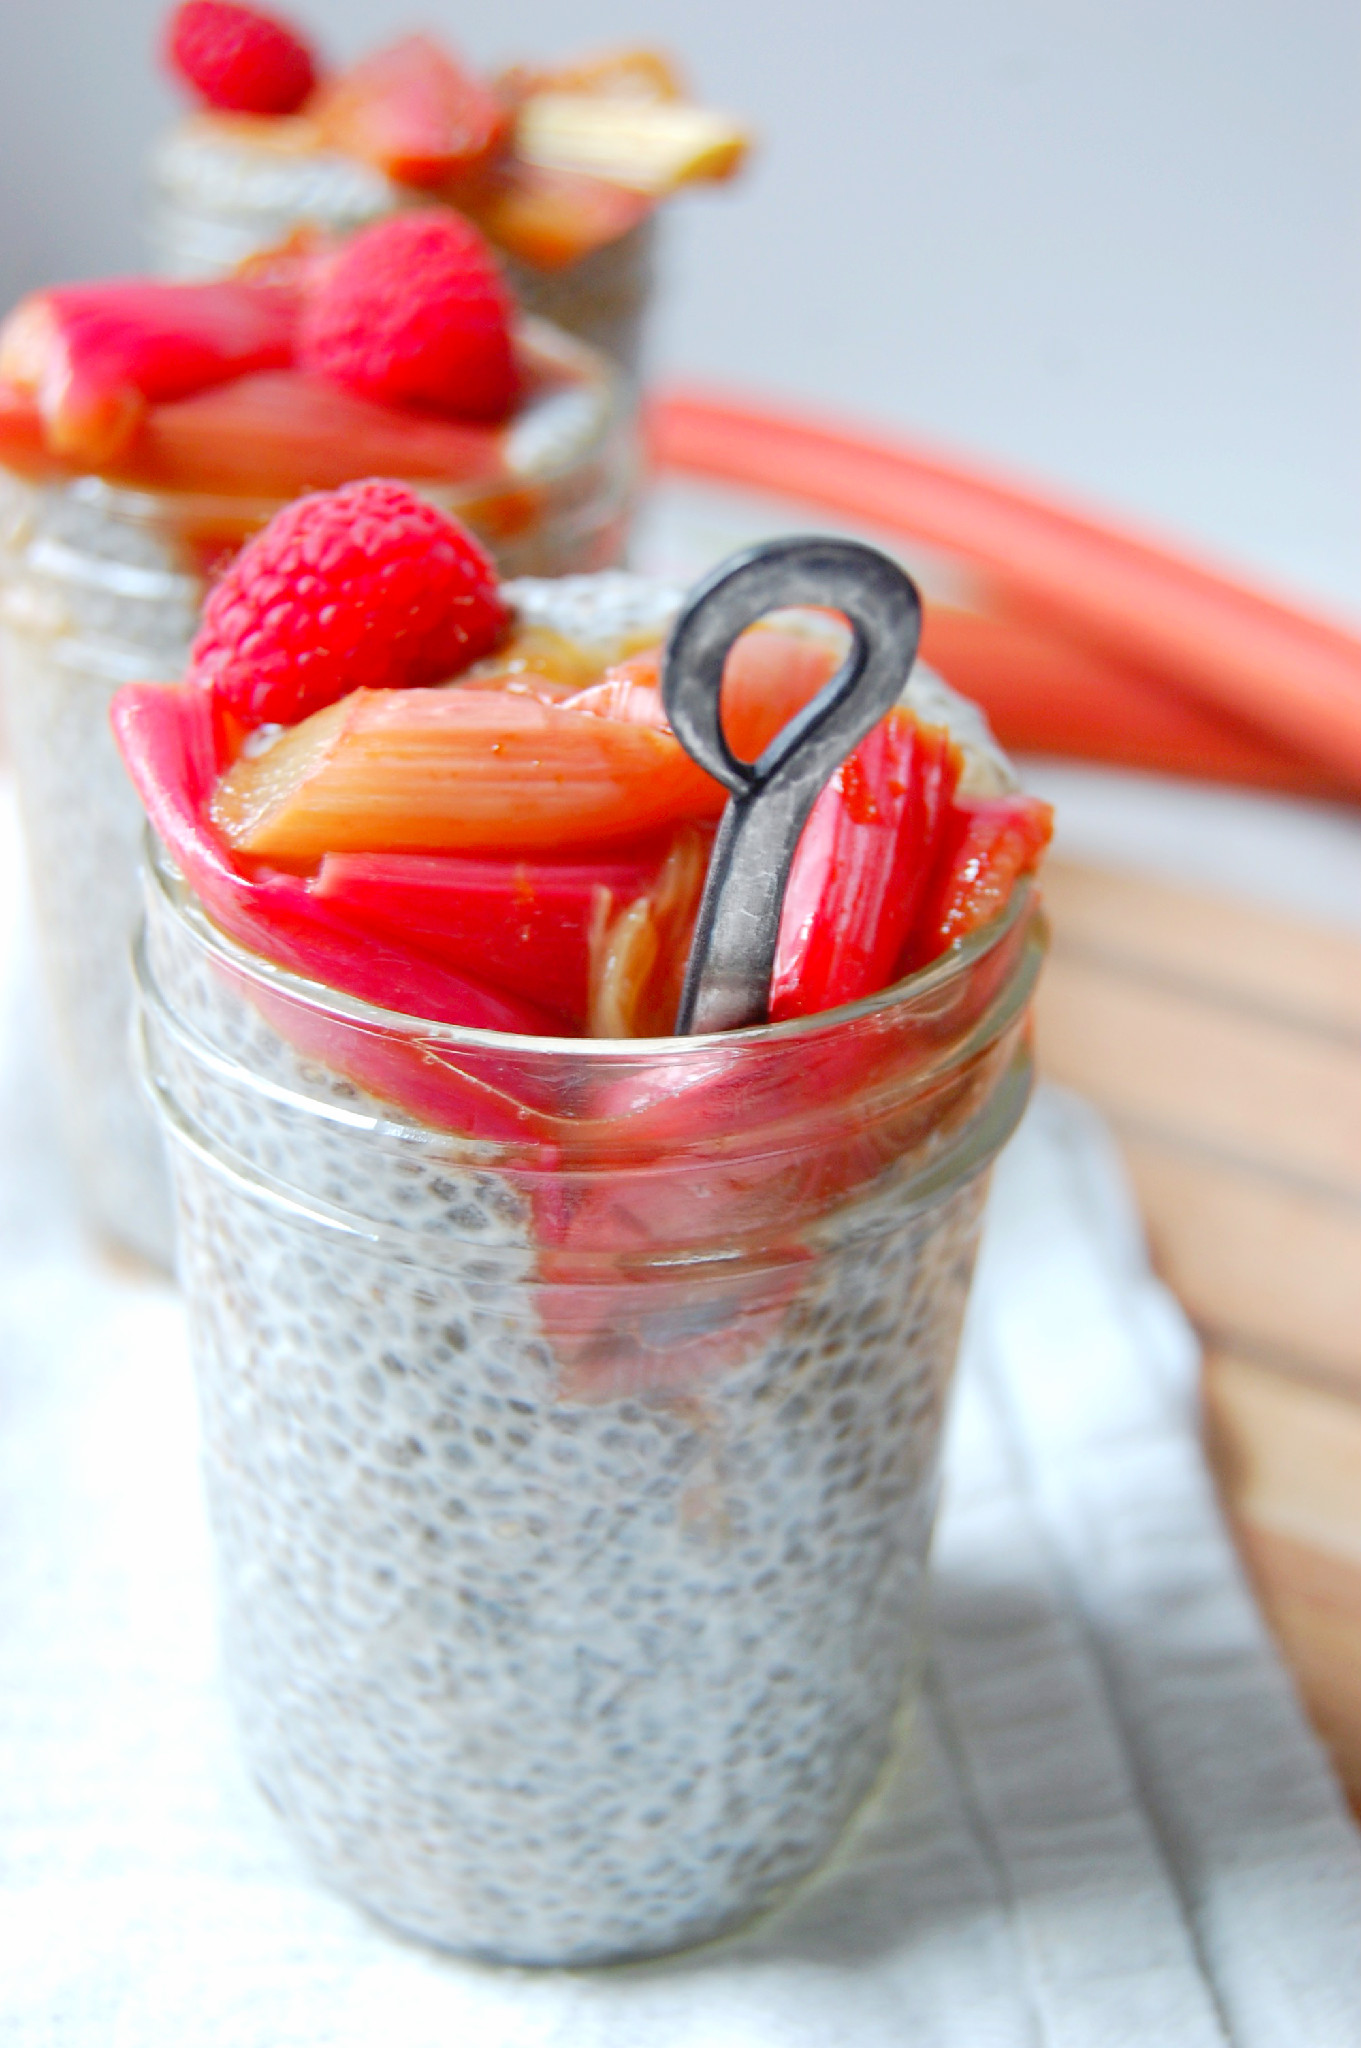 Vanilla Bean Chia Seed Pudding with Roasted Rhubarb is a gluten-free and vegan snack that is portable and high in omega-3's! | UprootKitchen.com